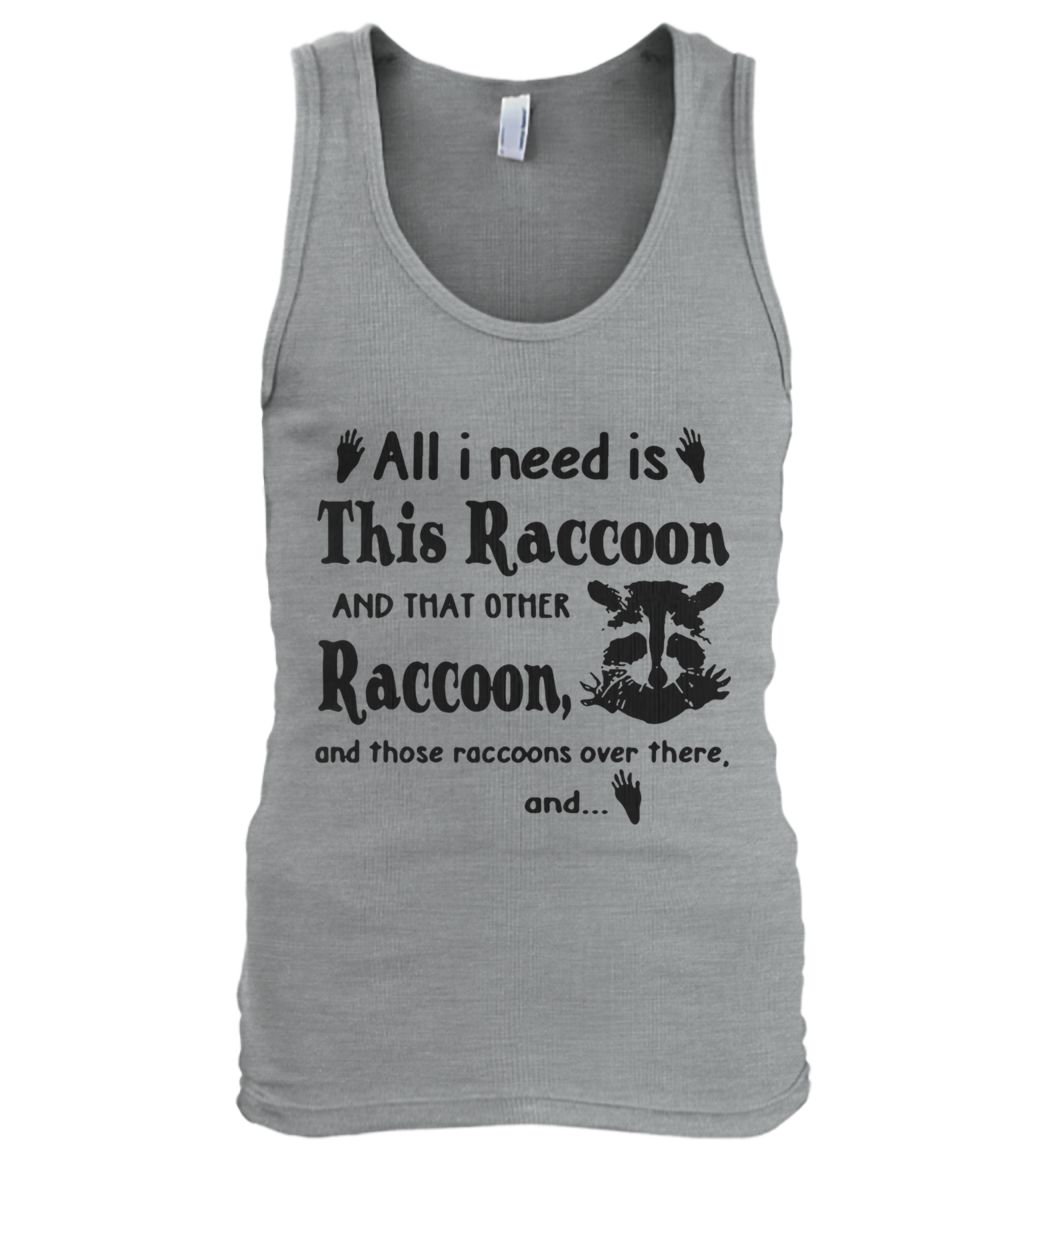 All I need is this raccoon and that other raccoon and those raccoons over there and men's tank top